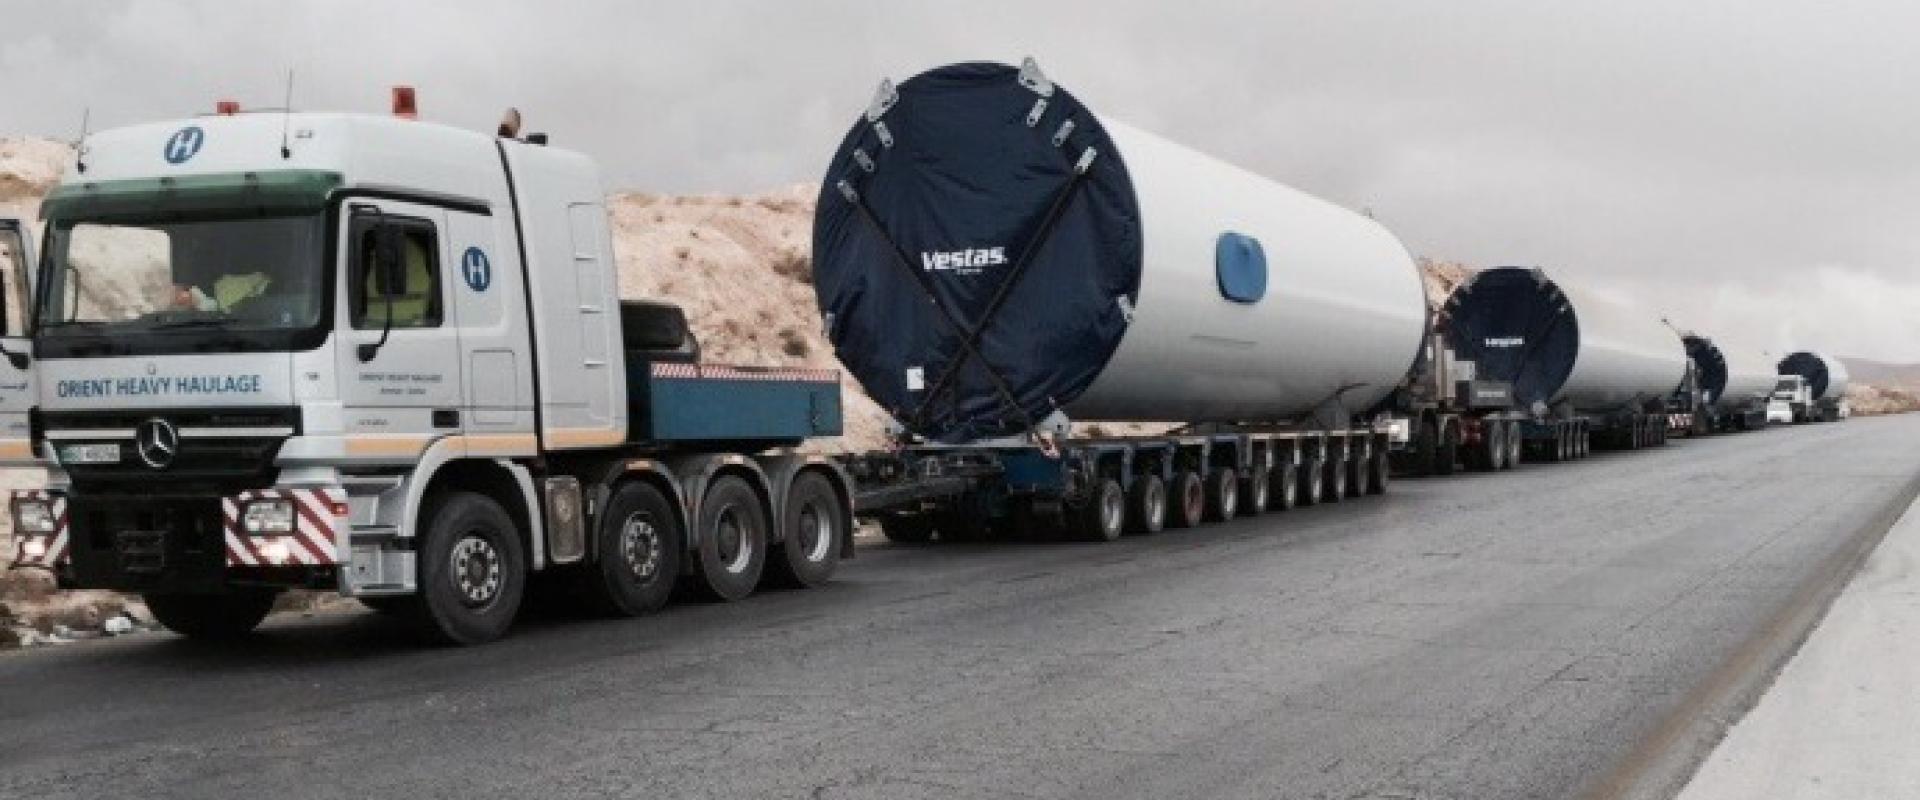 OHH - Transport of Vestas Tower Sections